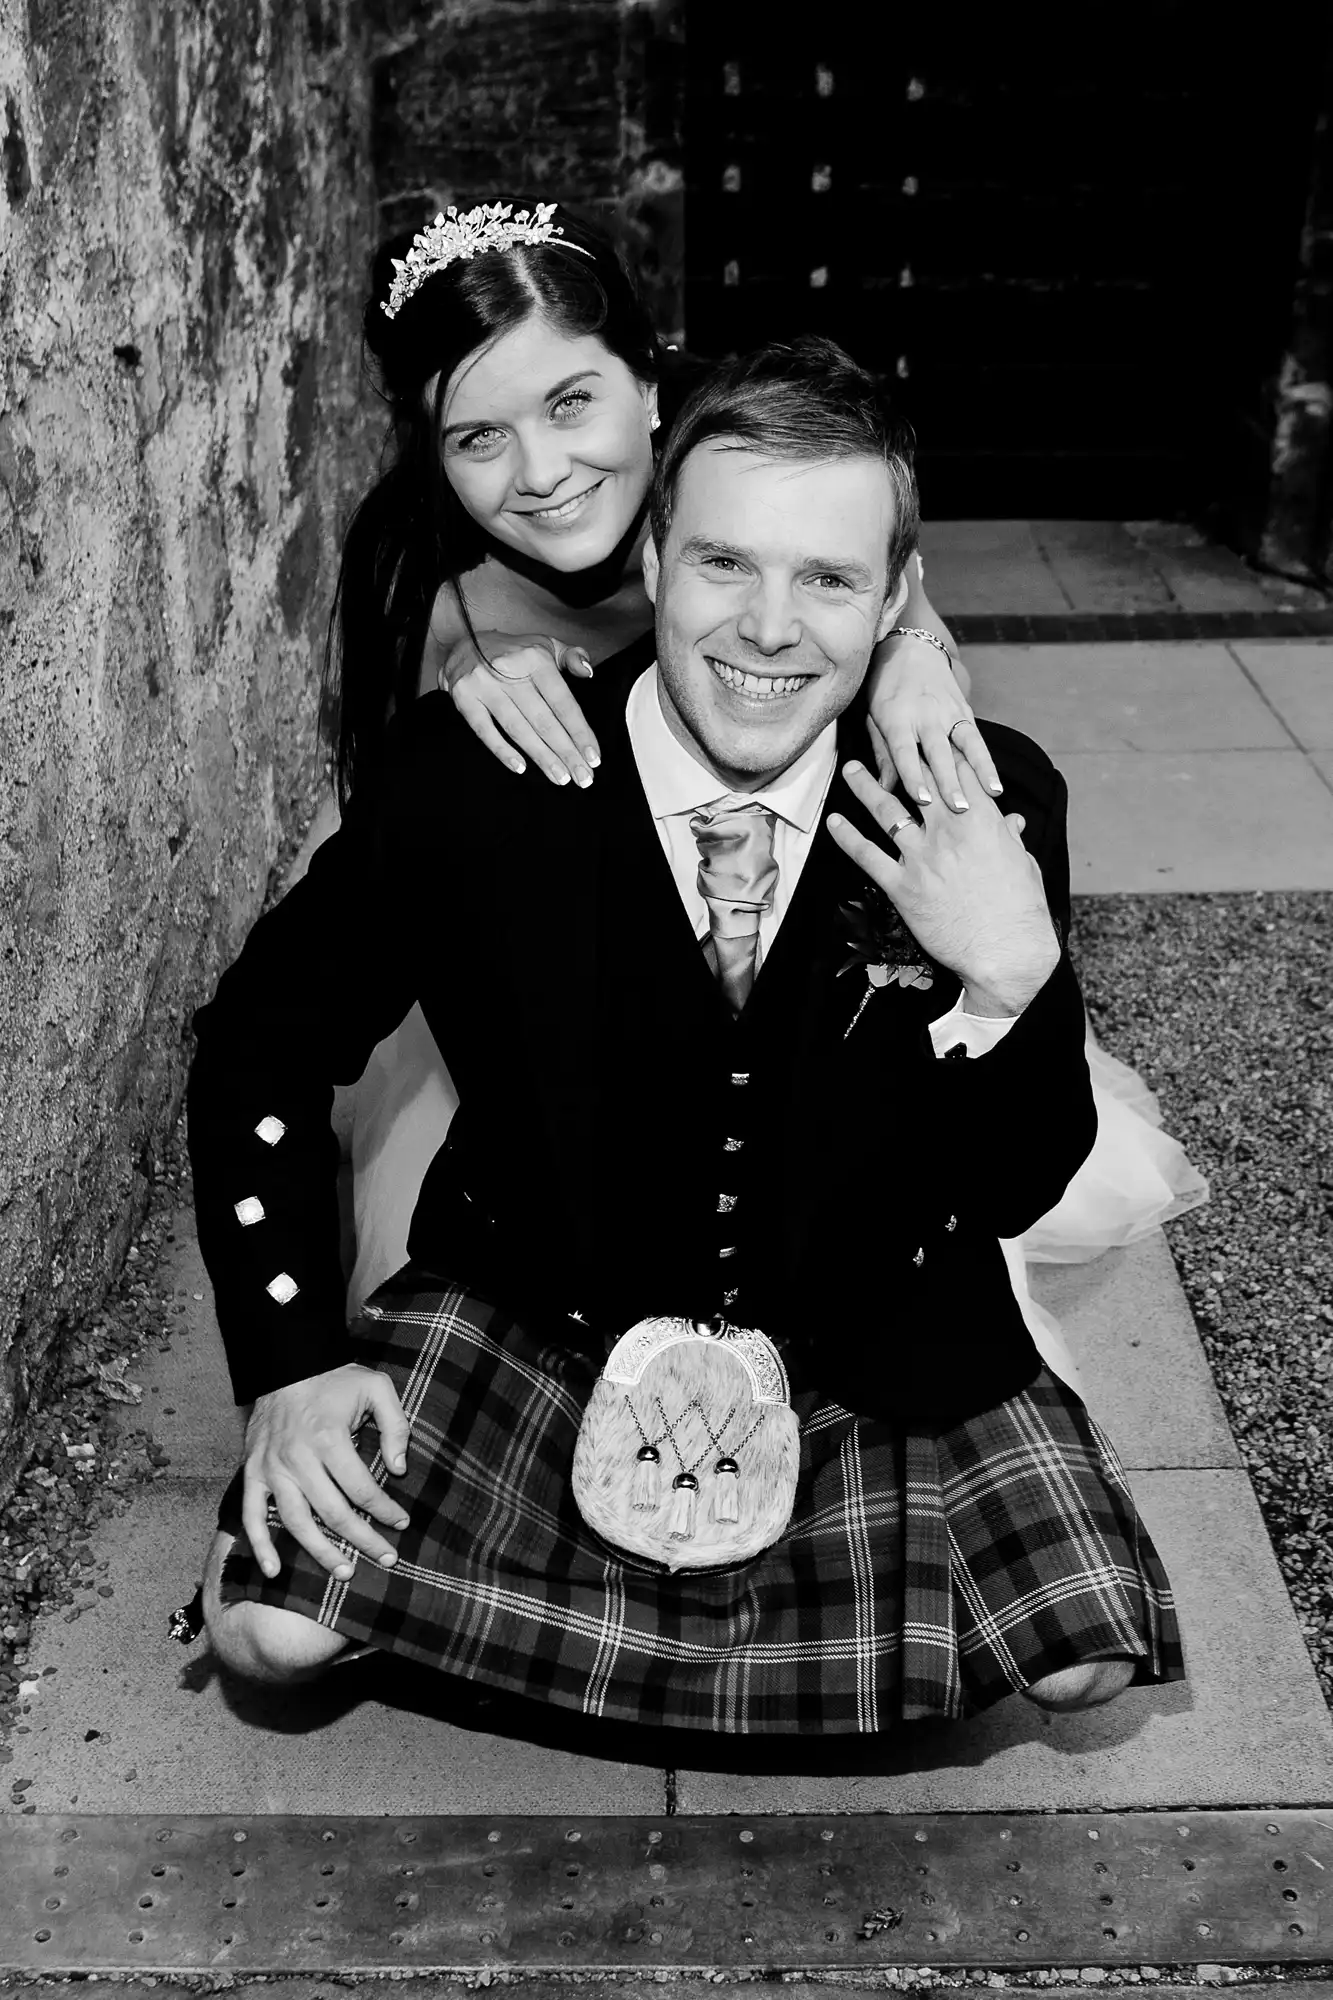 A happy couple in wedding attire; the man wears a kilt and the woman, a tiara. they're seated closely, smiling, in a monochrome photo.